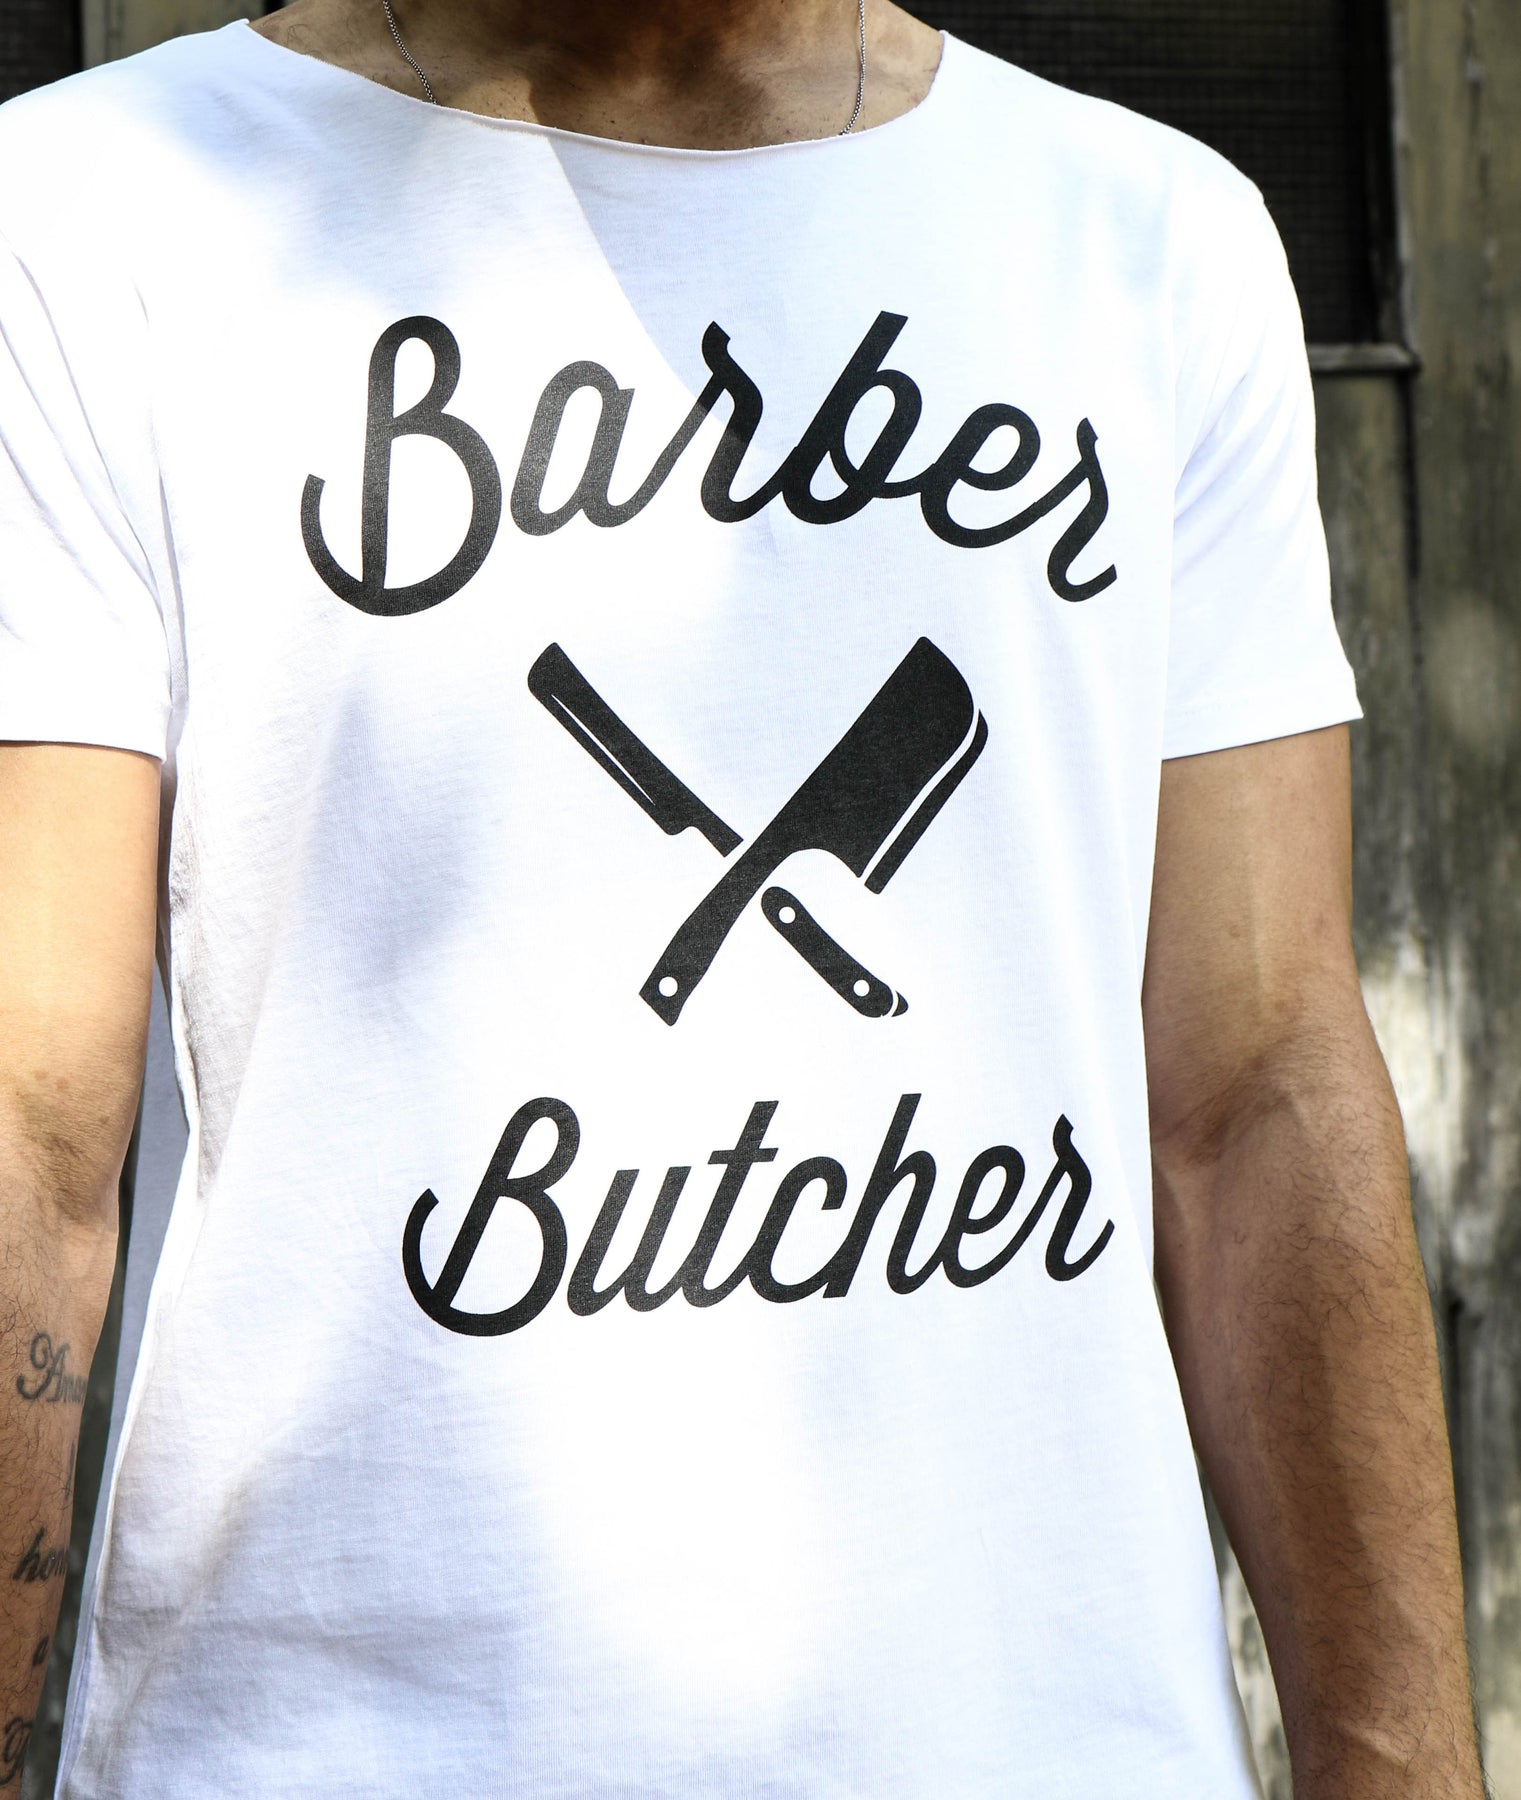 | Distorted USA – People Butcher Black T-Shirt Barber People Blades & Neck Distorted Cut